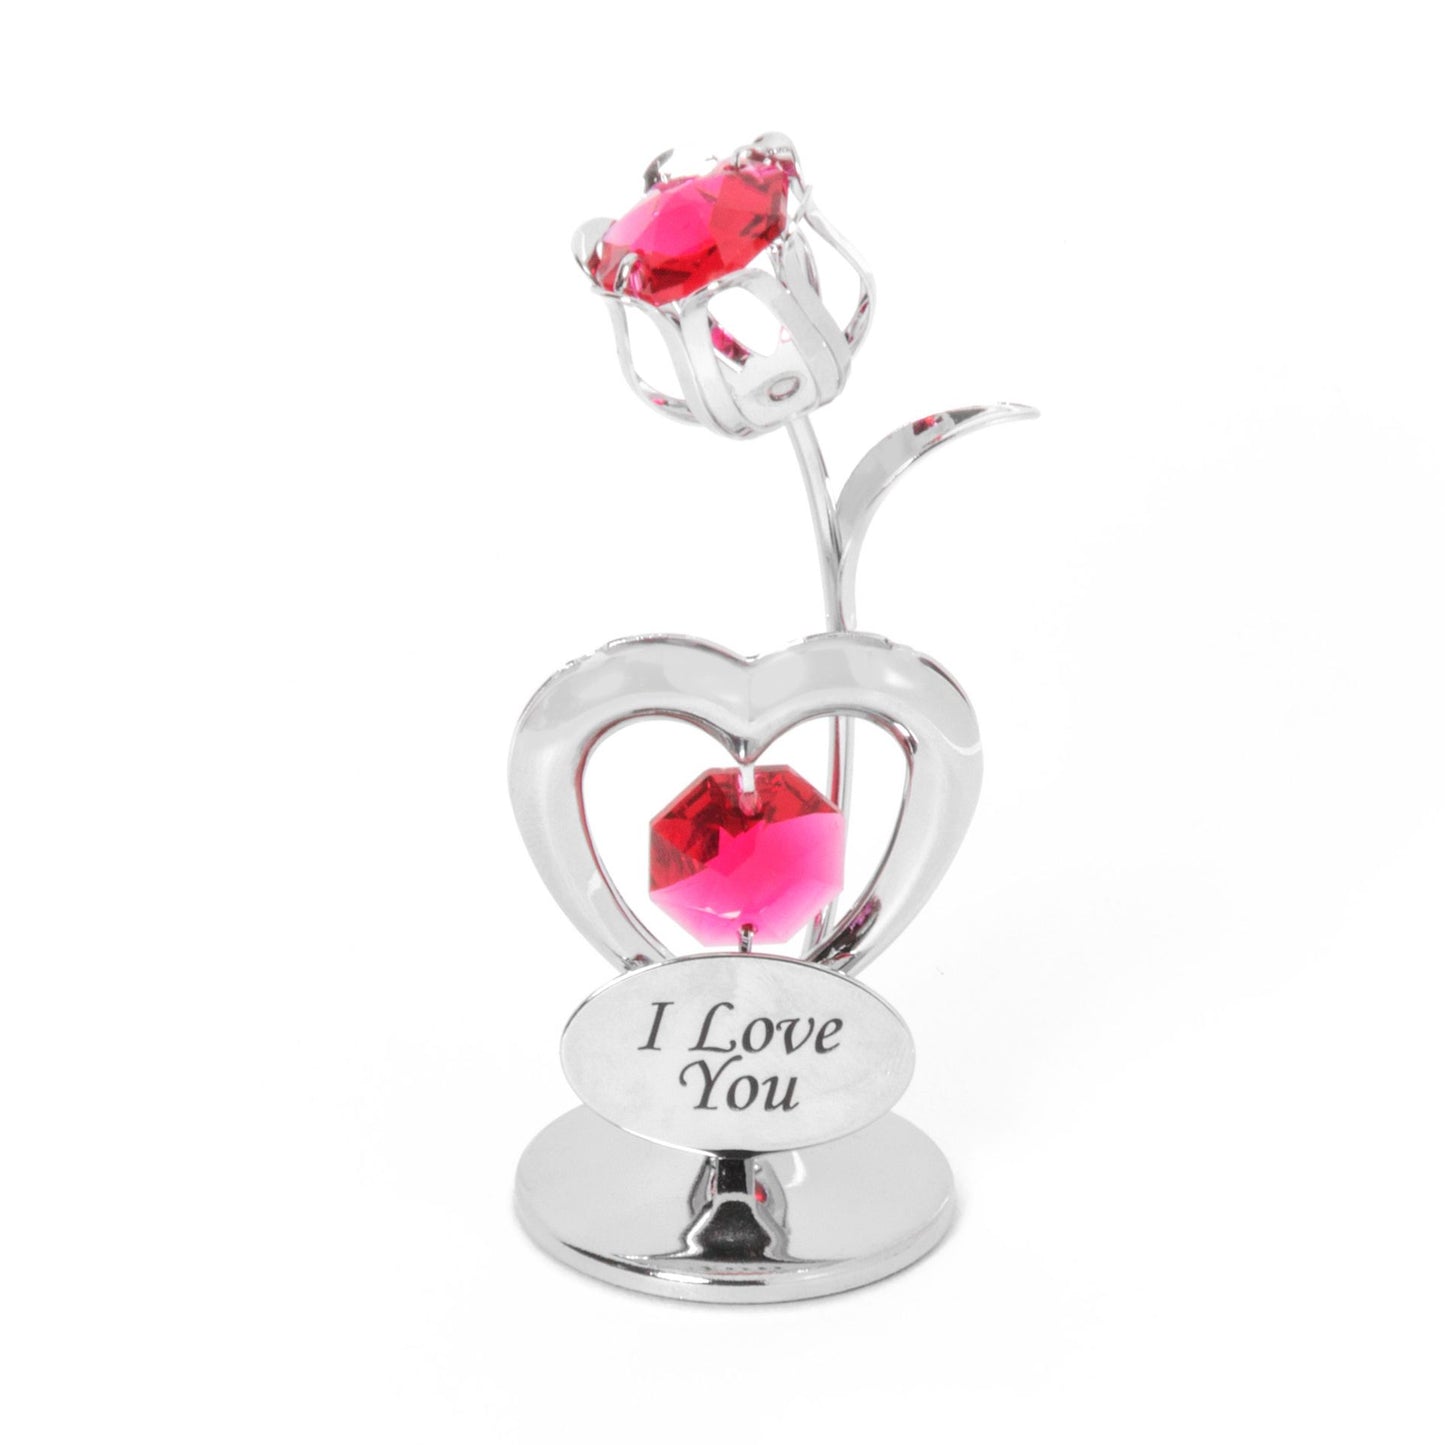 Crystocraft Heart and Tulip Ornament "I Love You"